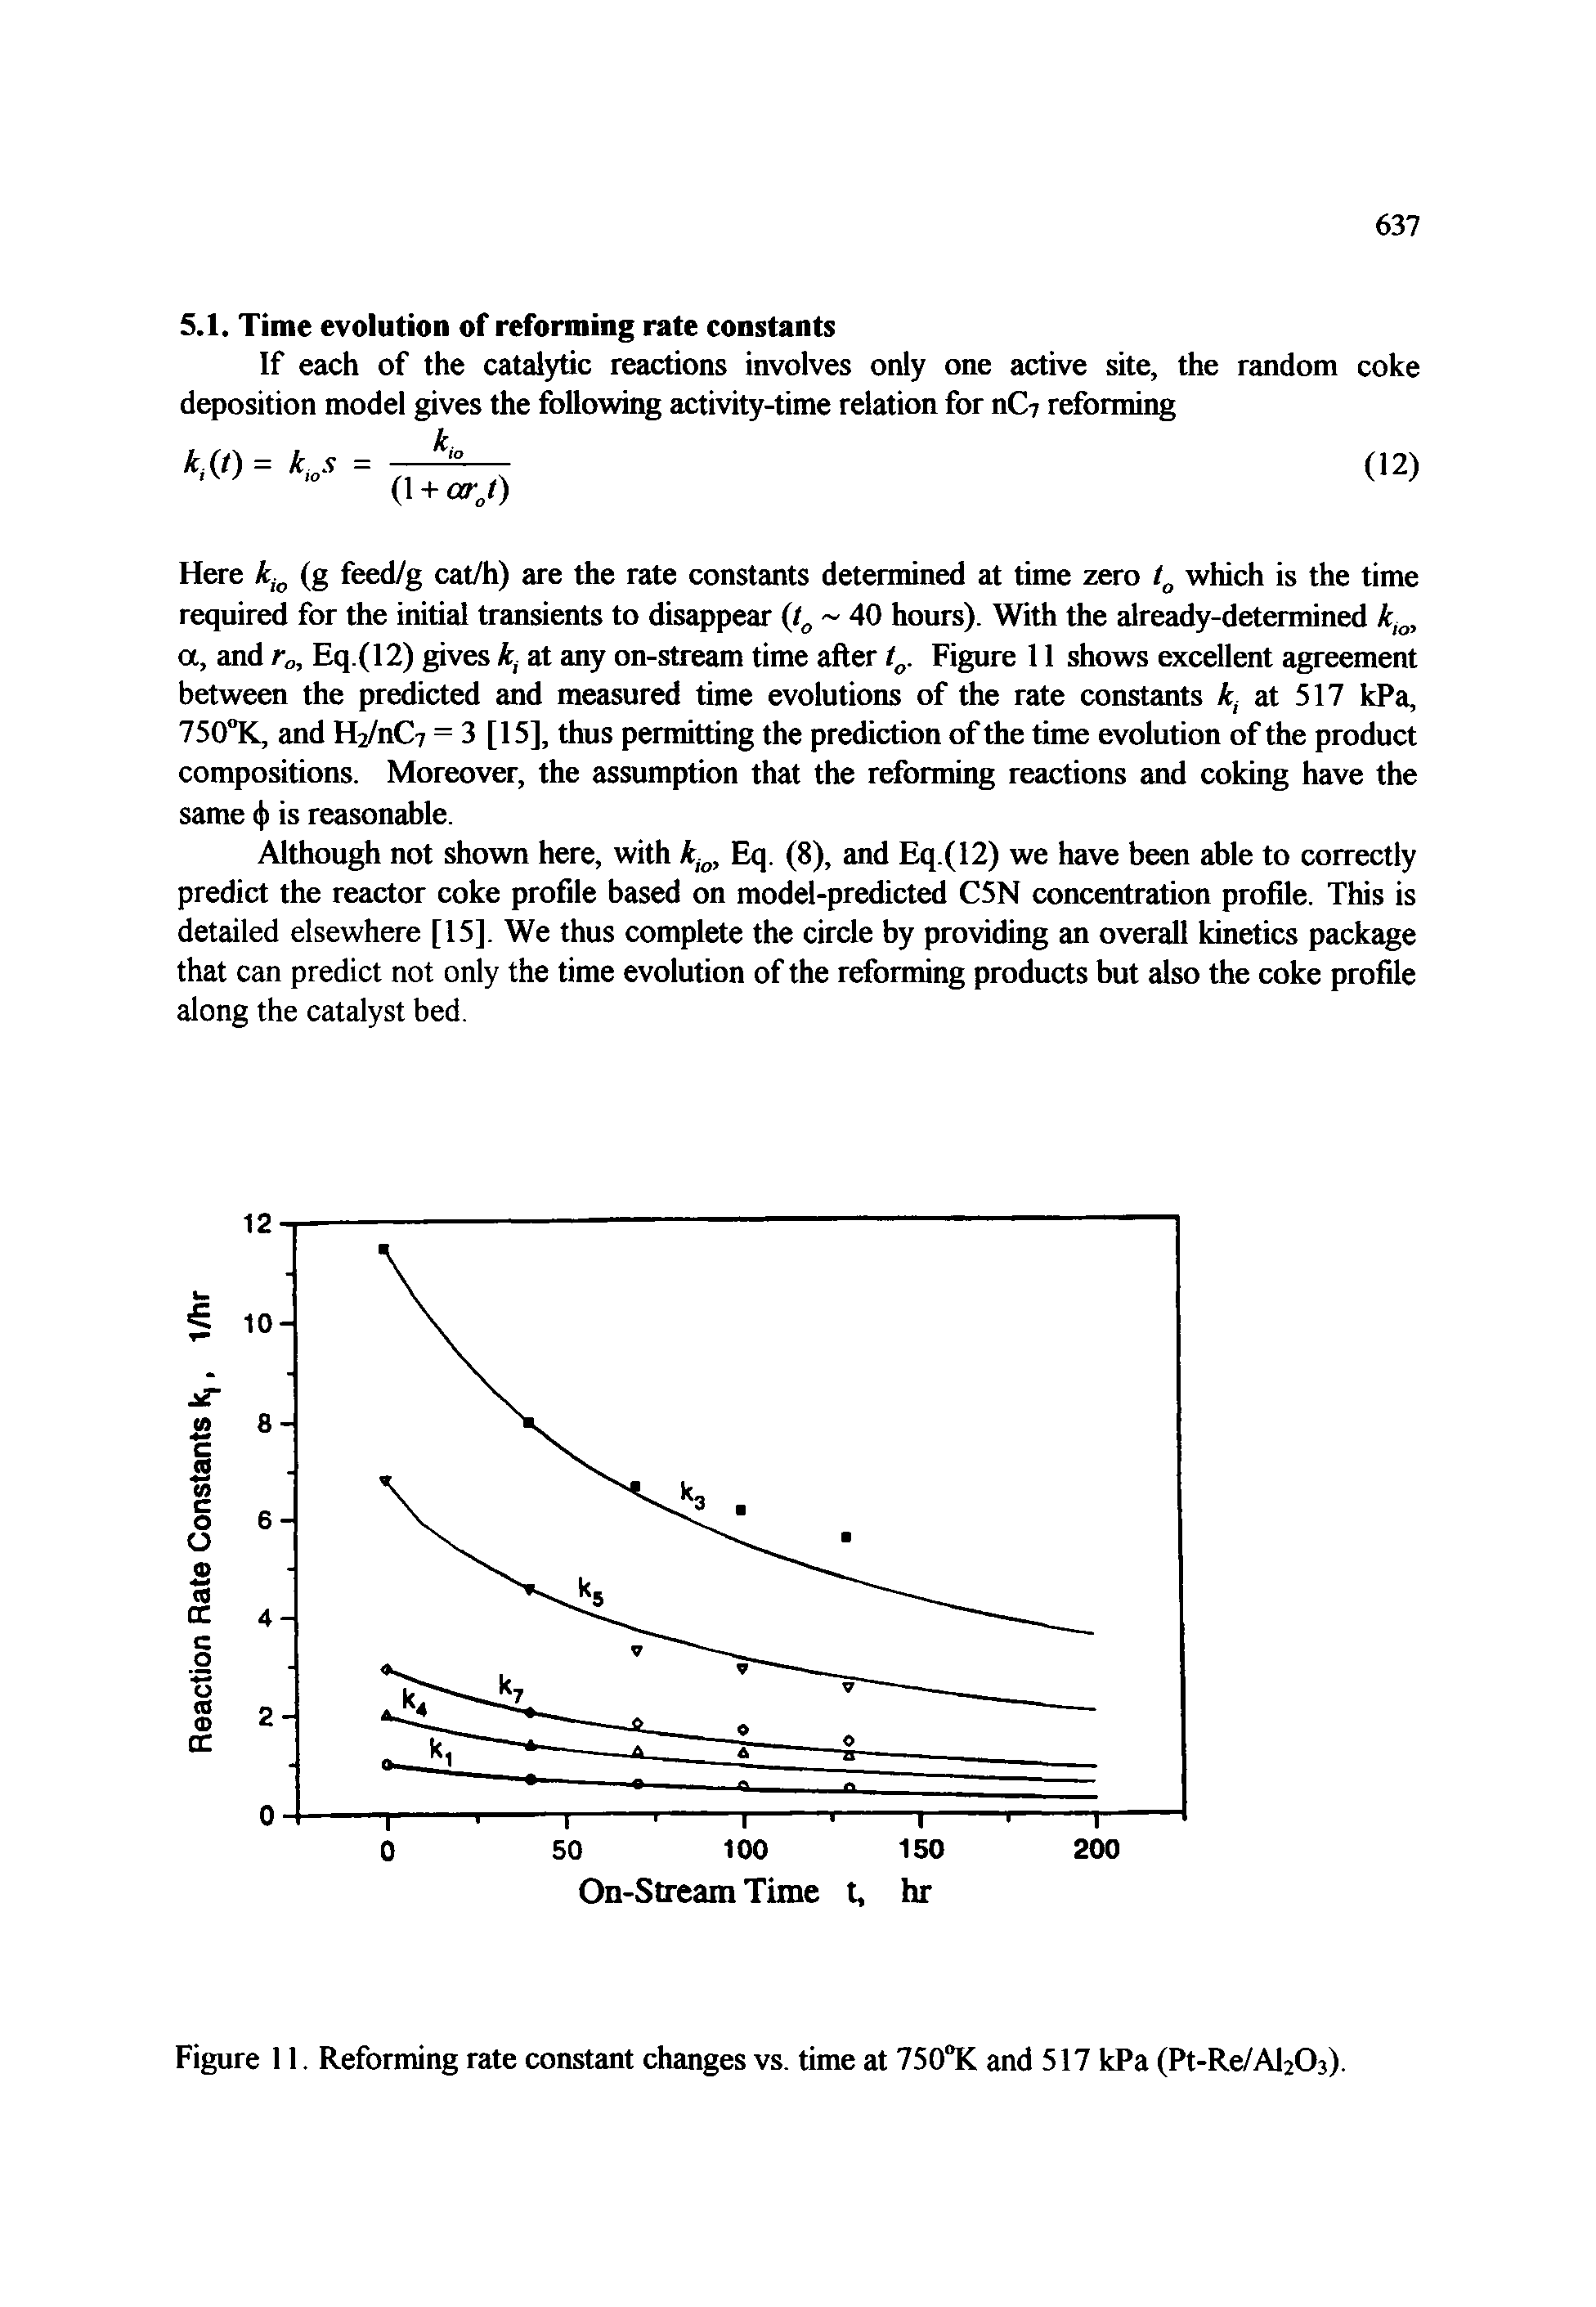 Figure 11. Reforming rate constant changes vs. time at 750 K and 517 kPa (Pt-Re/Al203).